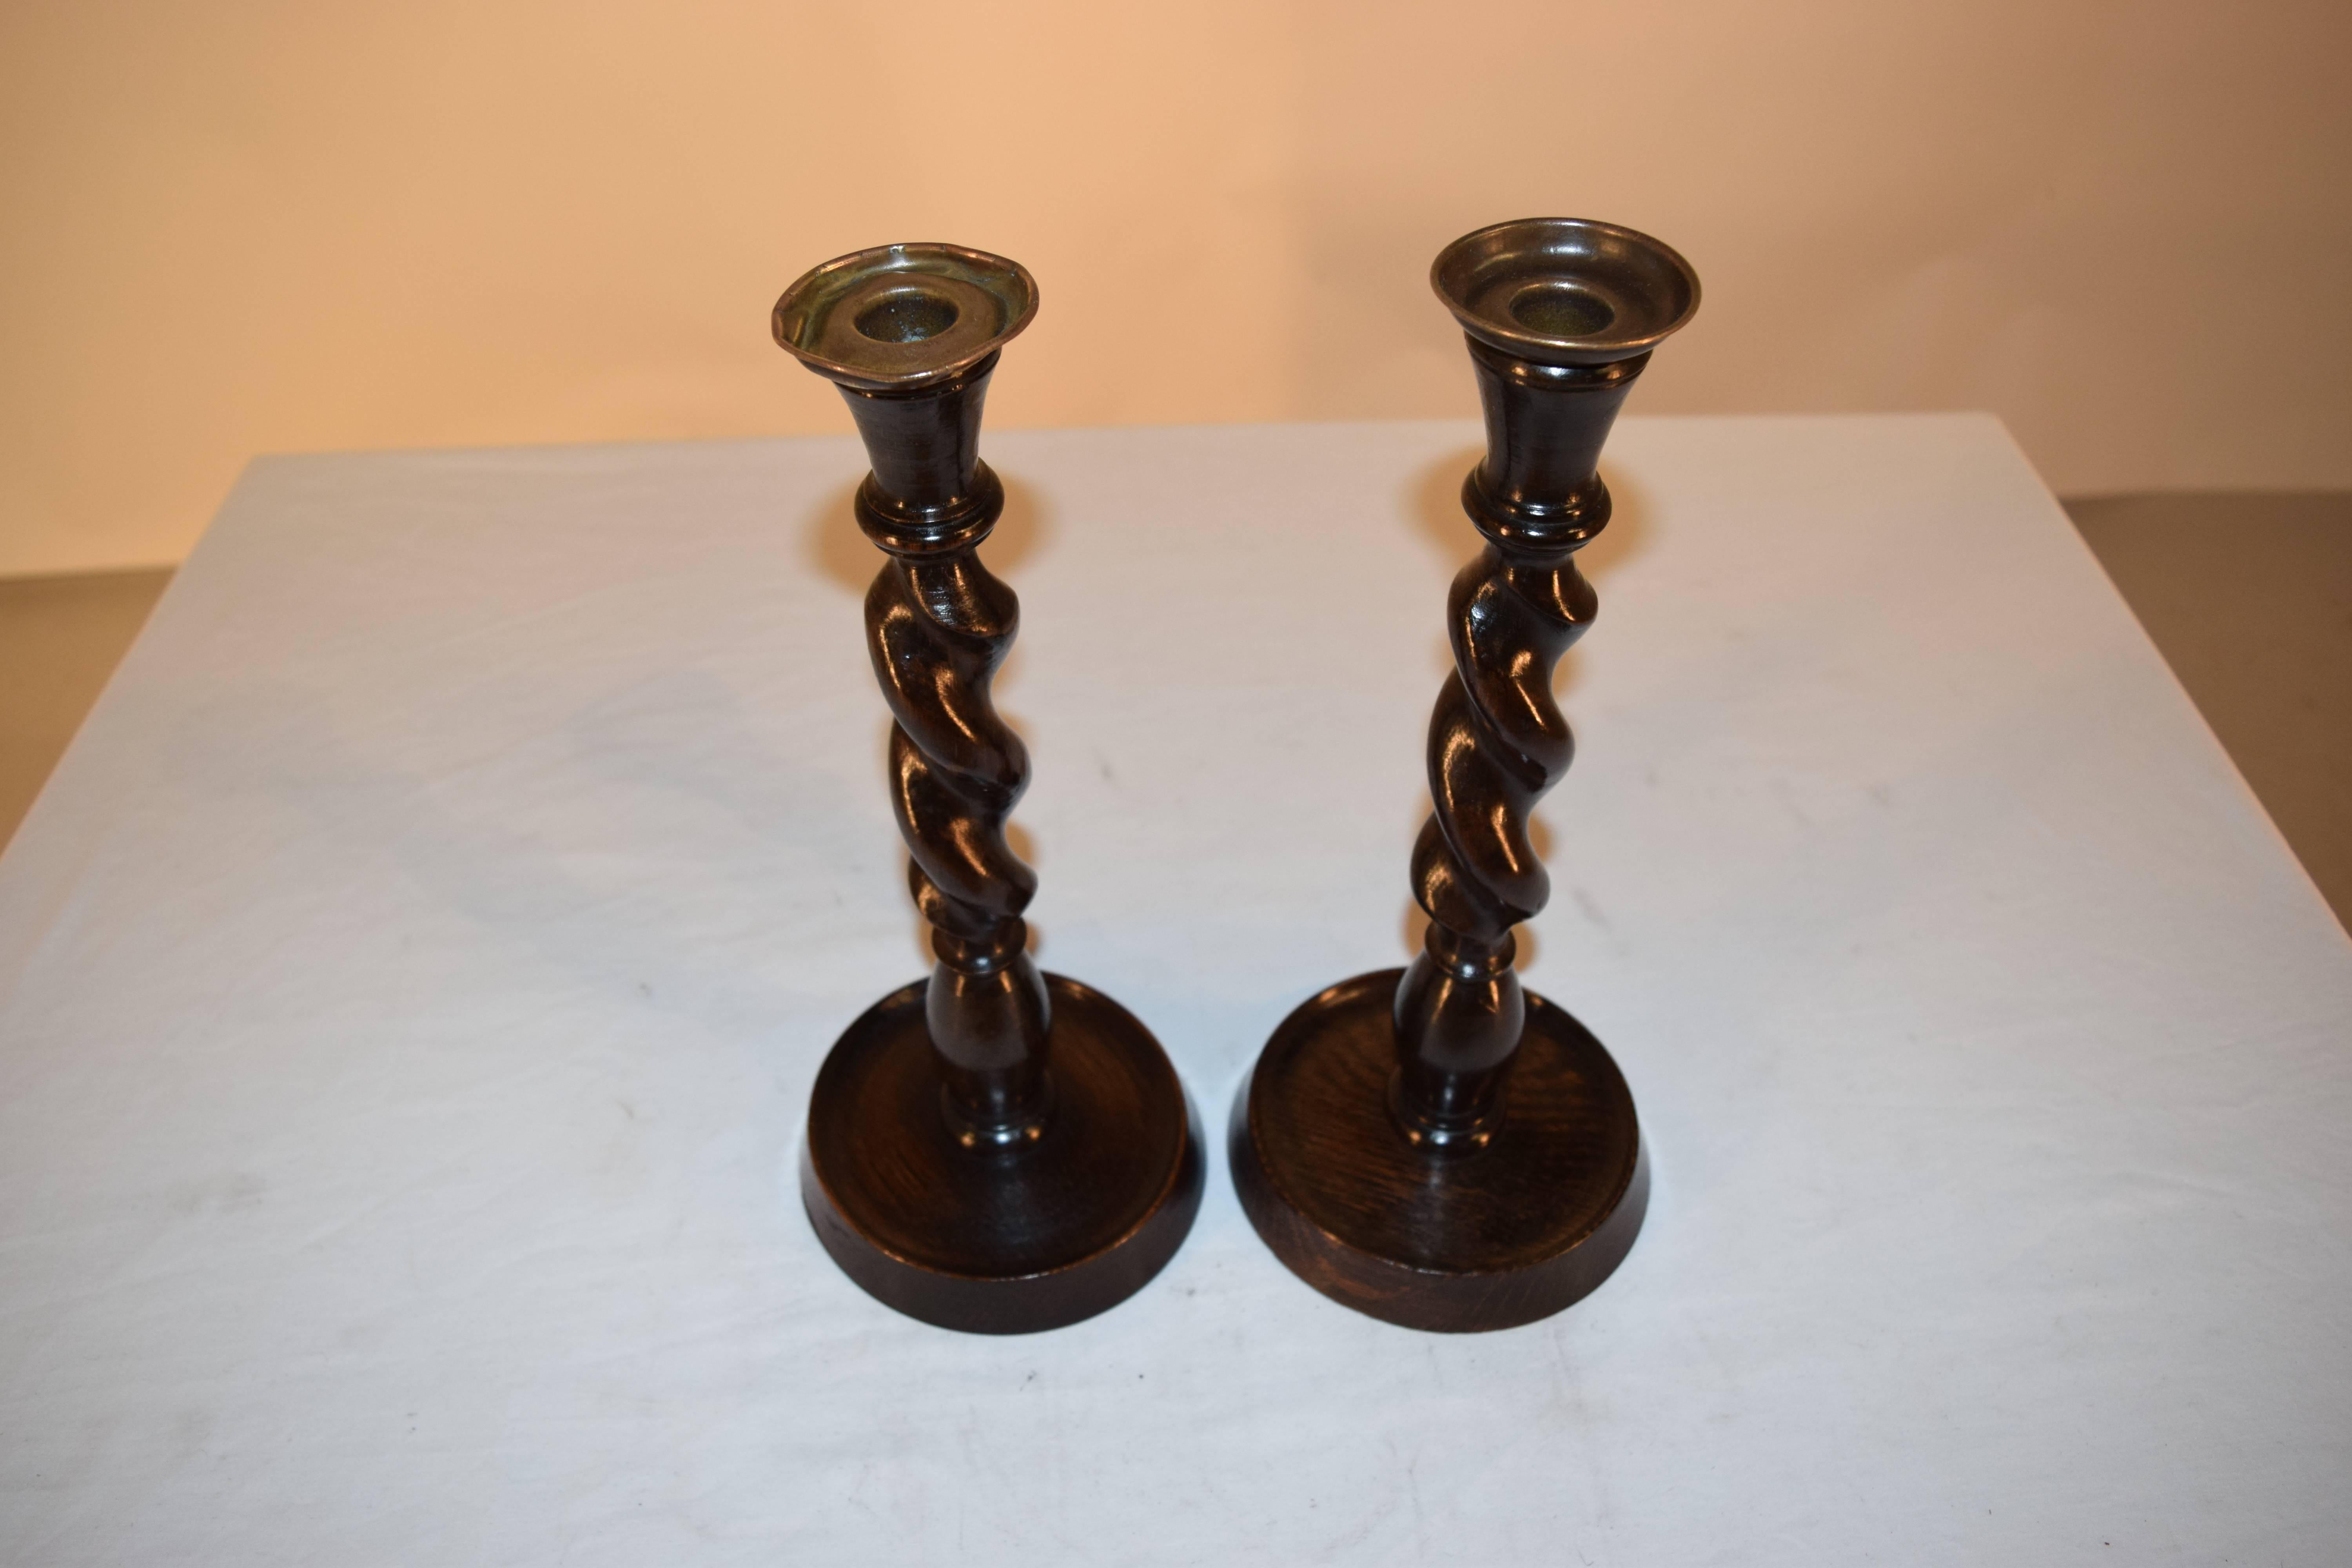 Pair of English oak hand-turned candlesticks with a cone shaped top, following down to barley twist stems, and shaped bases.